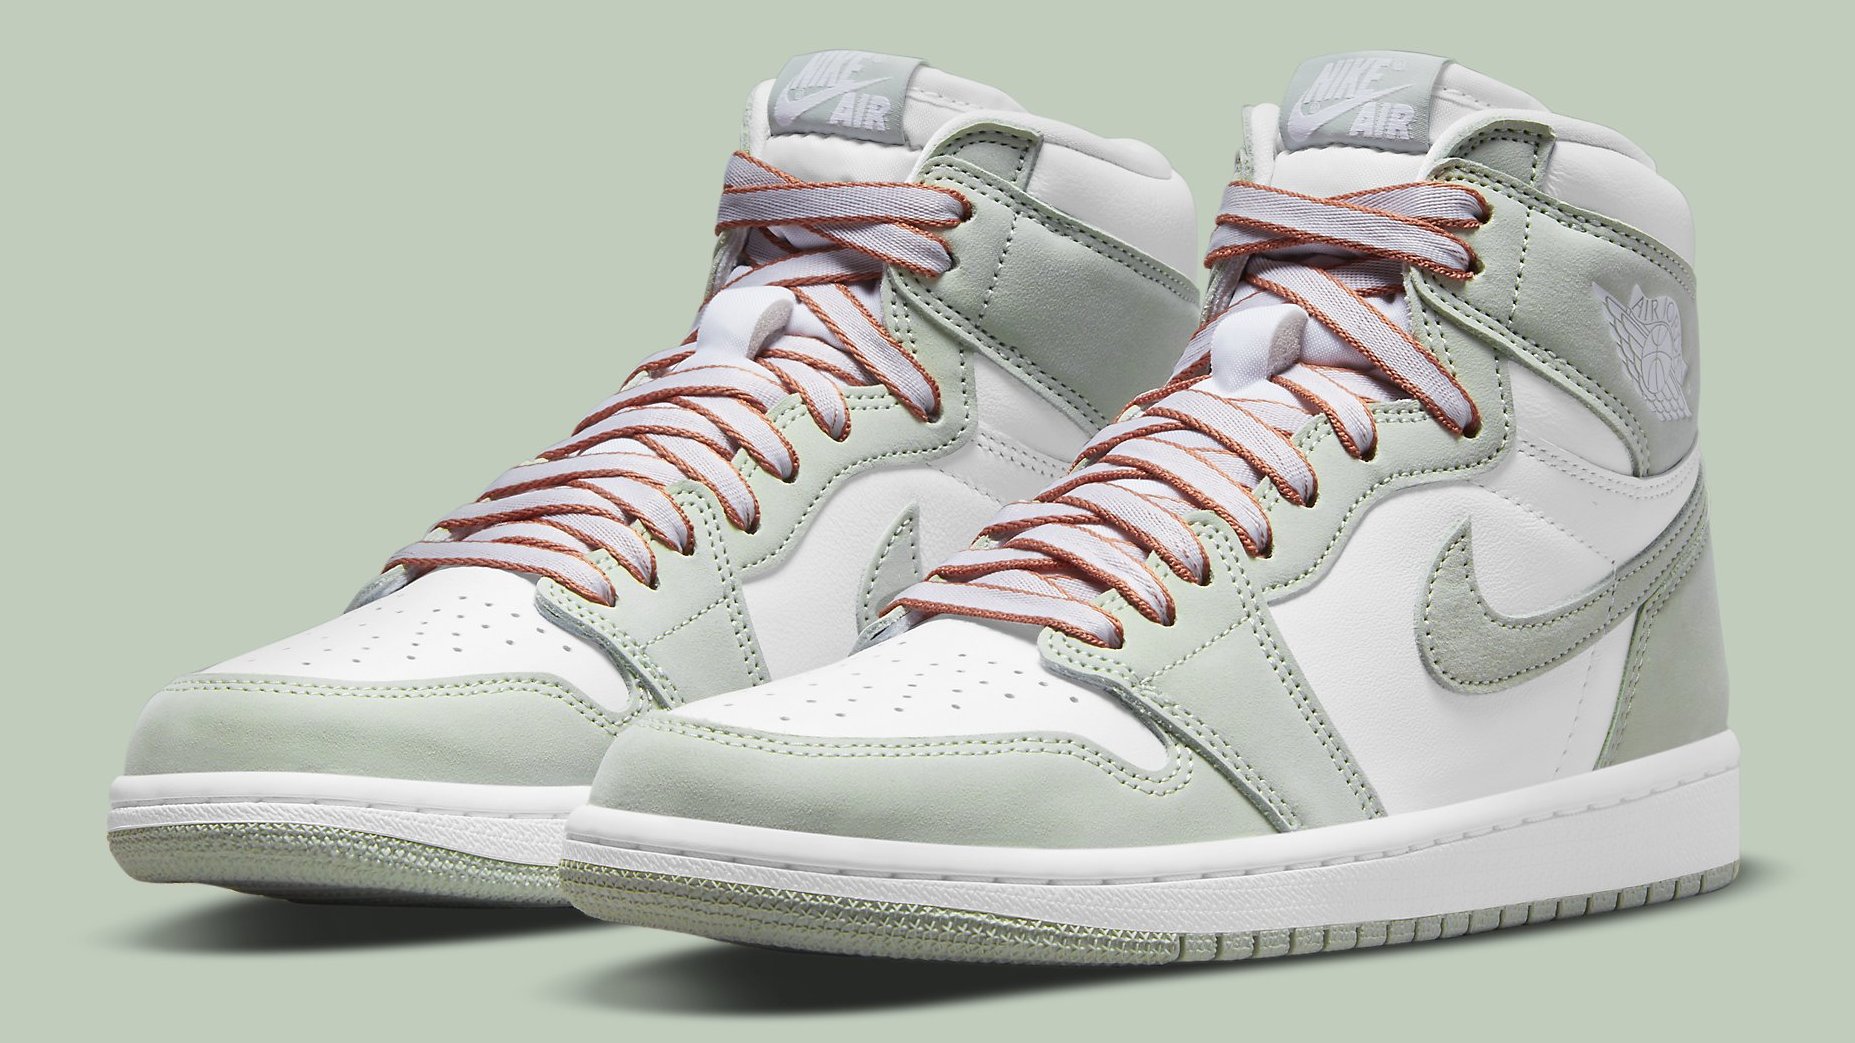 New 'Seafoam' Air Jordan 1 High to Release This Month | Complex